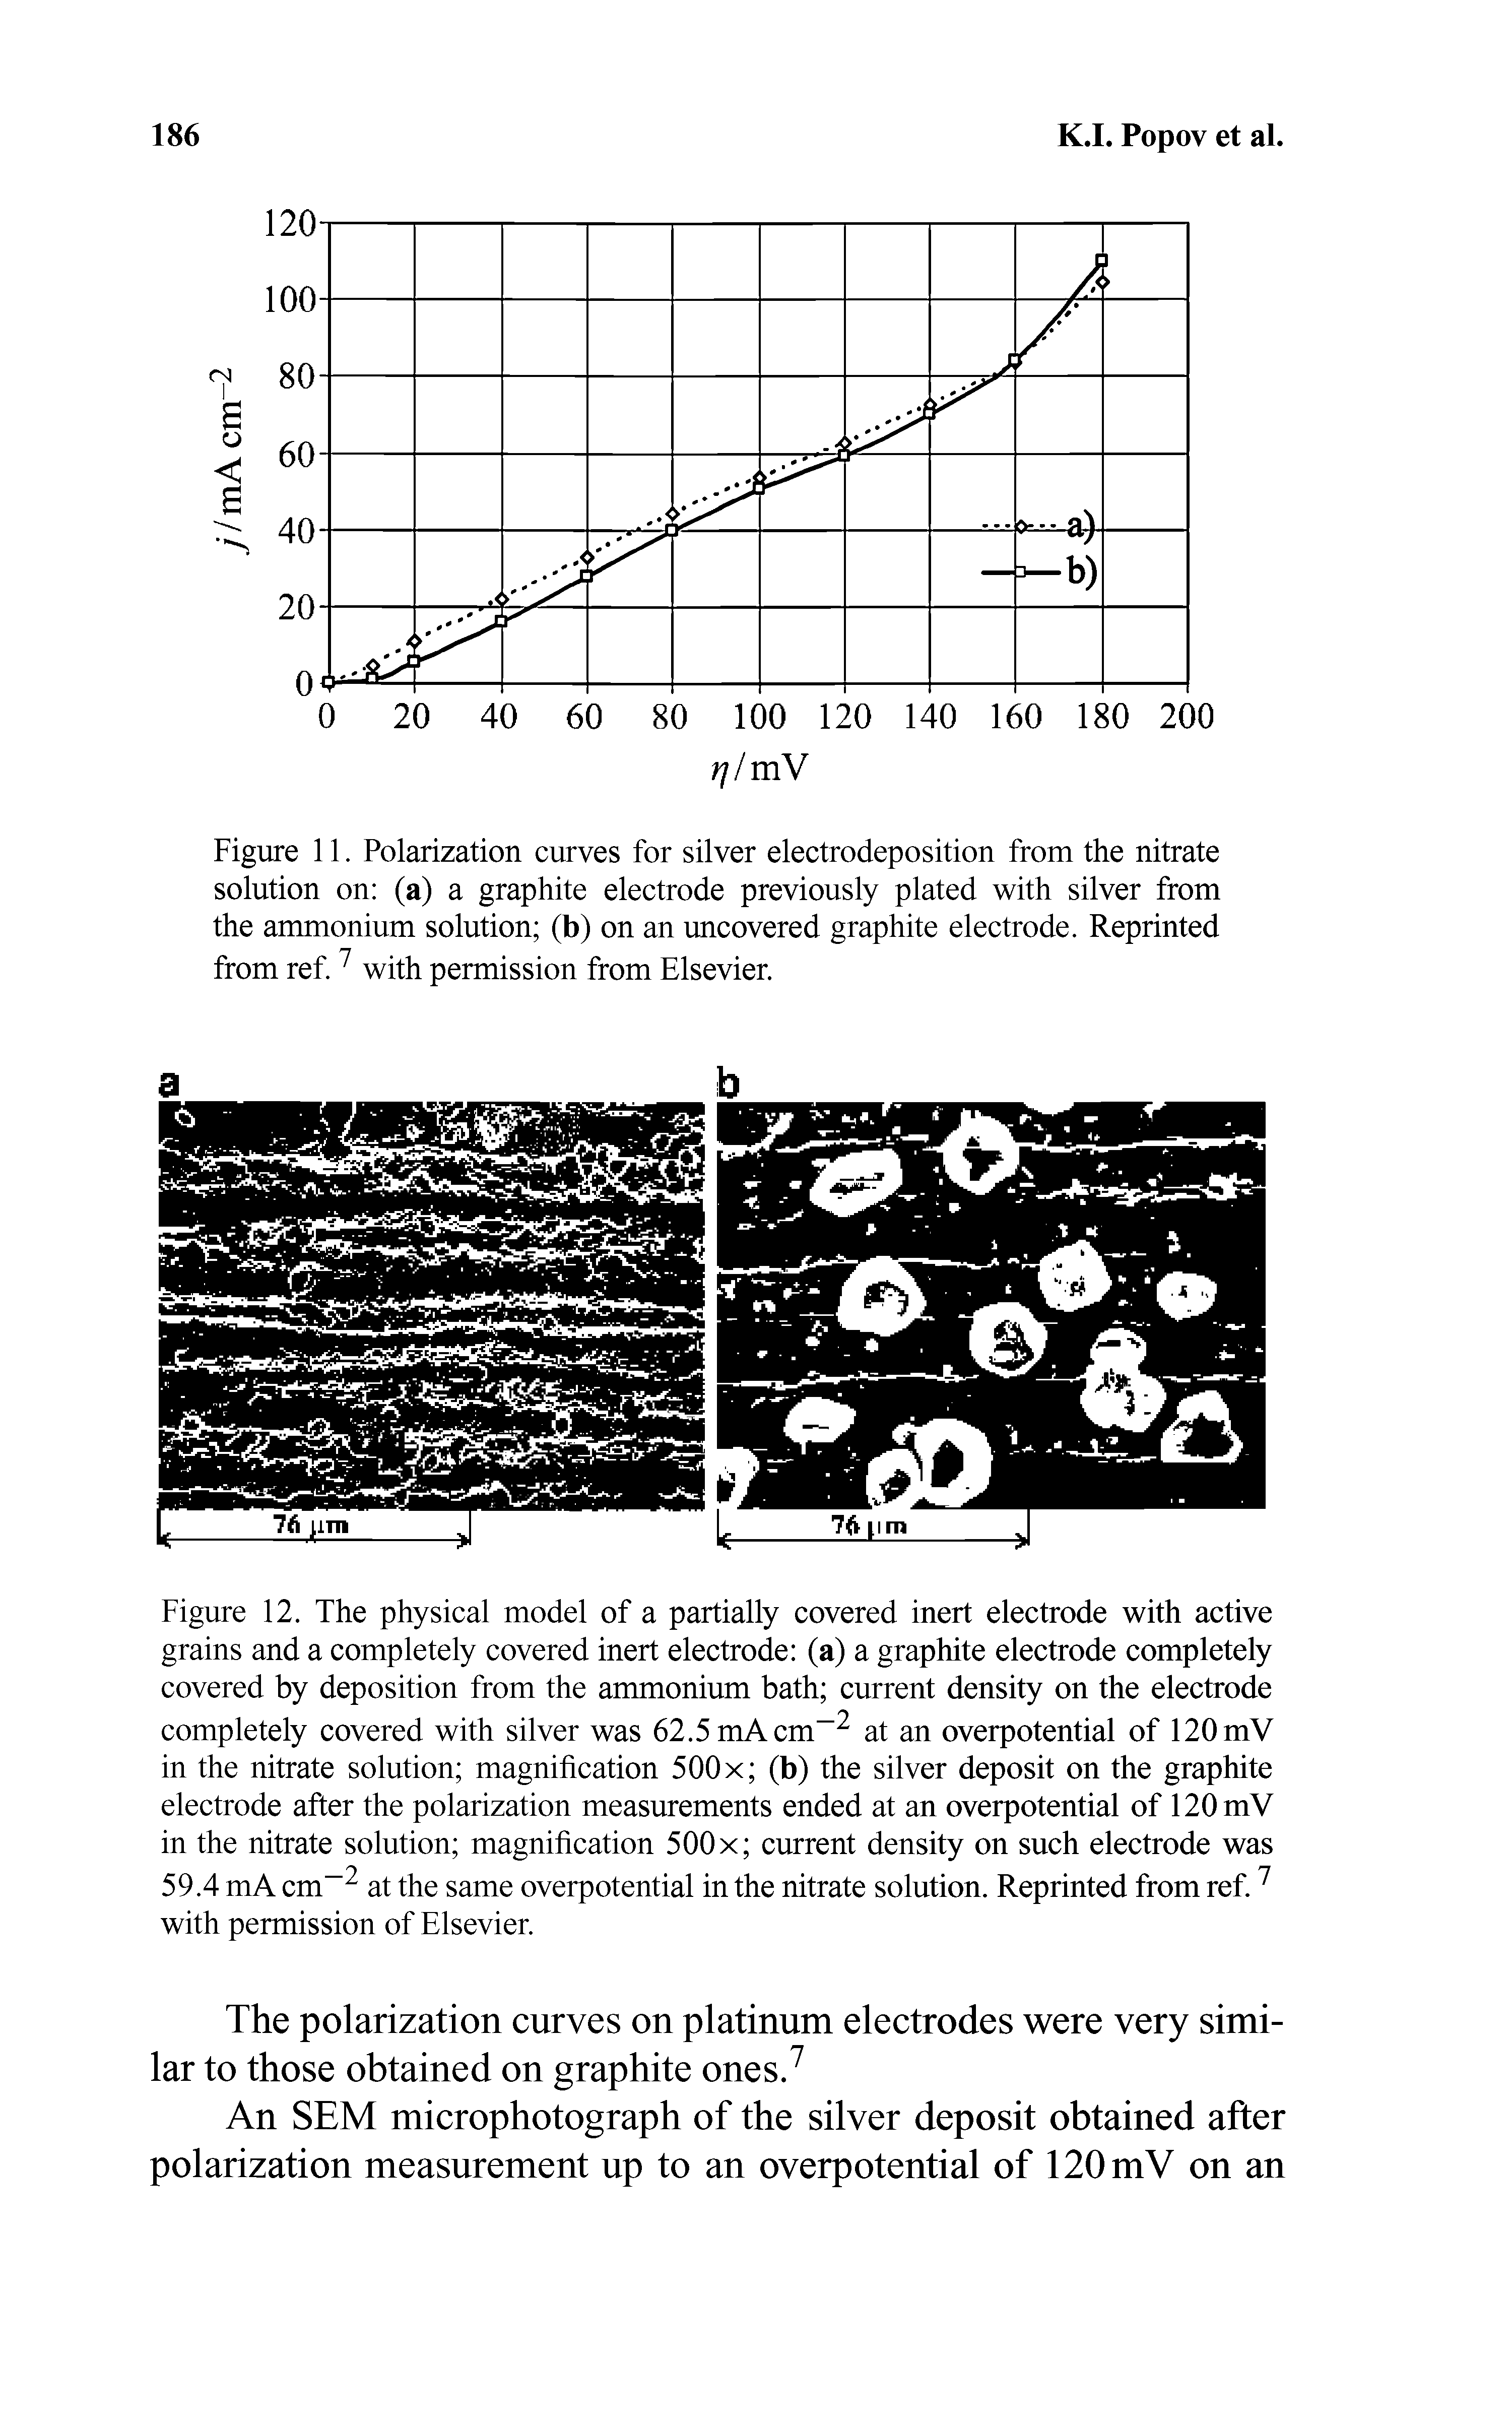 Figure 12. The physical model of a partially covered inert electrode with active grains and a completely covered inert electrode (a) a graphite electrode completely covered by deposition from the ammonium bath current density on the electrode completely covered with silver was 62.5 mA cm-2 at an overpotential of 120 mV in the nitrate solution magnification 500 x (b) the silver deposit on the graphite electrode after the polarization measurements ended at an overpotential of 120 mV in the nitrate solution magnification 500 x current density on such electrode was 59.4 mA cm-2 at the same overpotential in the nitrate solution. Reprinted from ref.7 with permission of Elsevier.